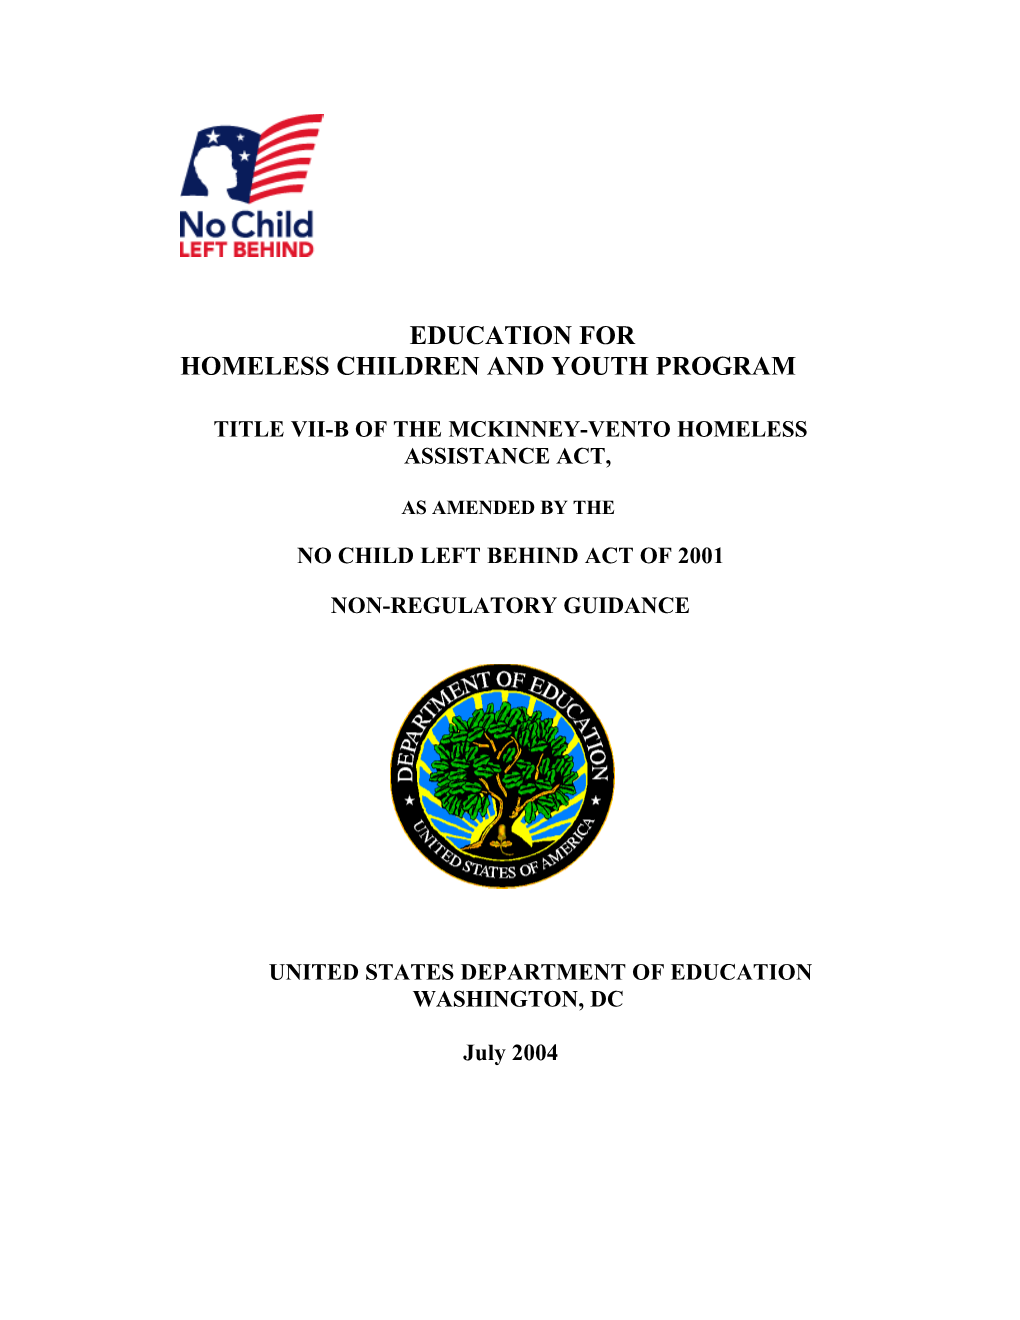 Guidance for the Education for Homeless Children and Youth Program Updated July 2004 (MS Word)